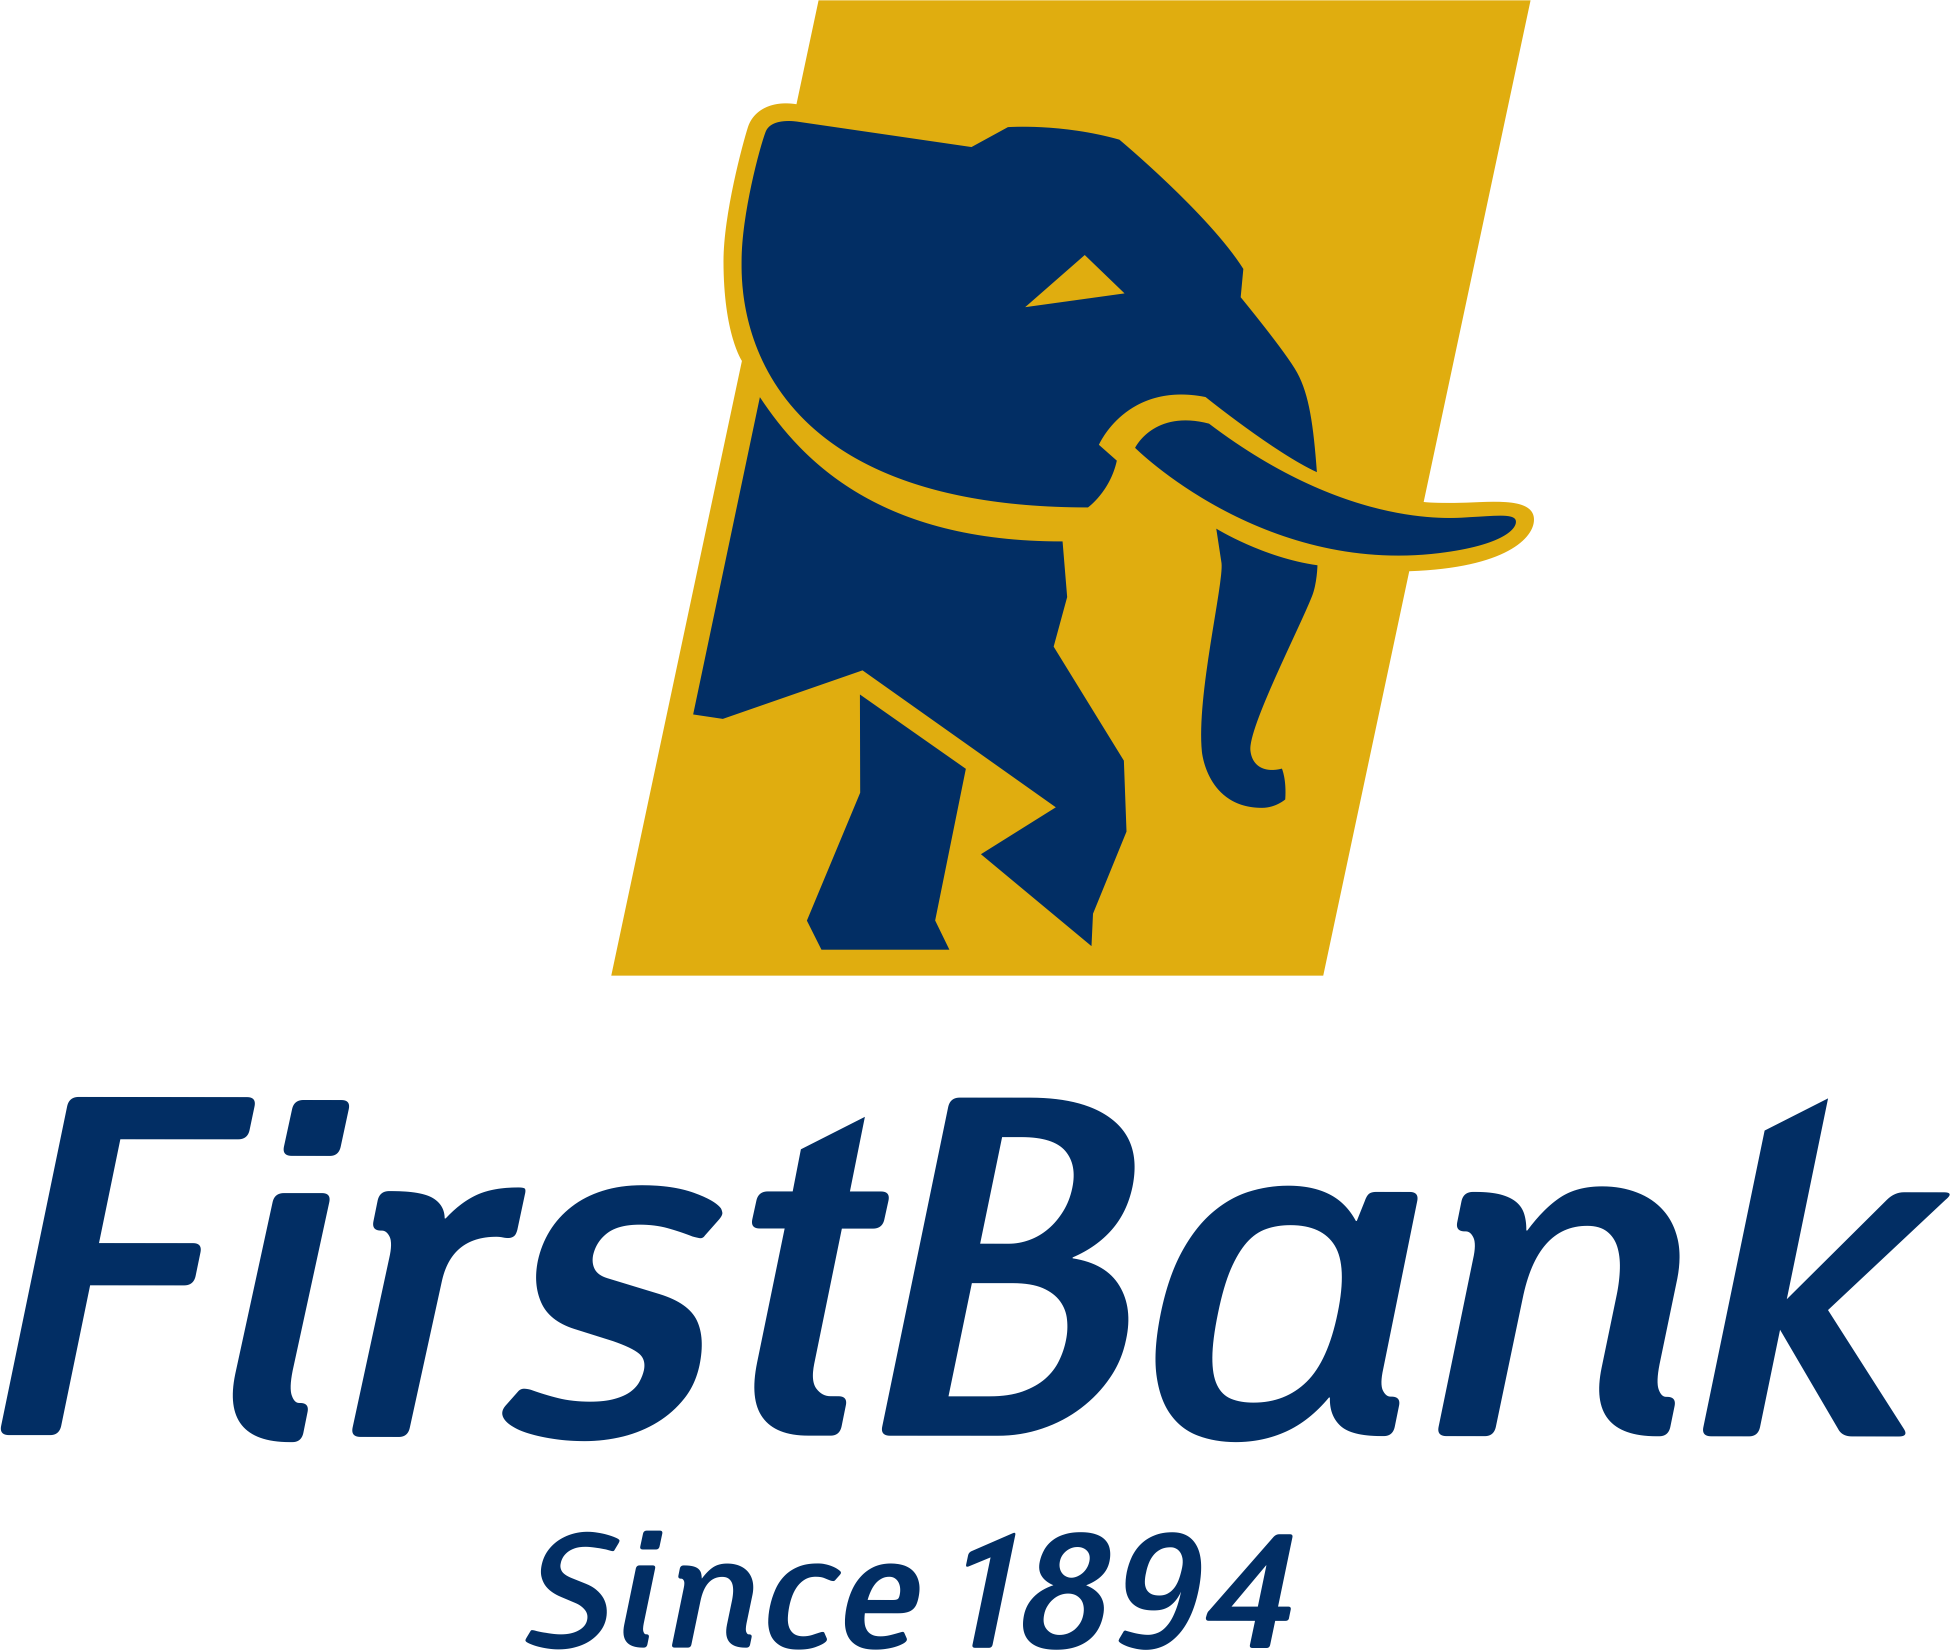 Firstbank Celebrates Its Annual Corporate Responsibility & Sustainability Week By Encouraging Kindness In Over Seven Countries.